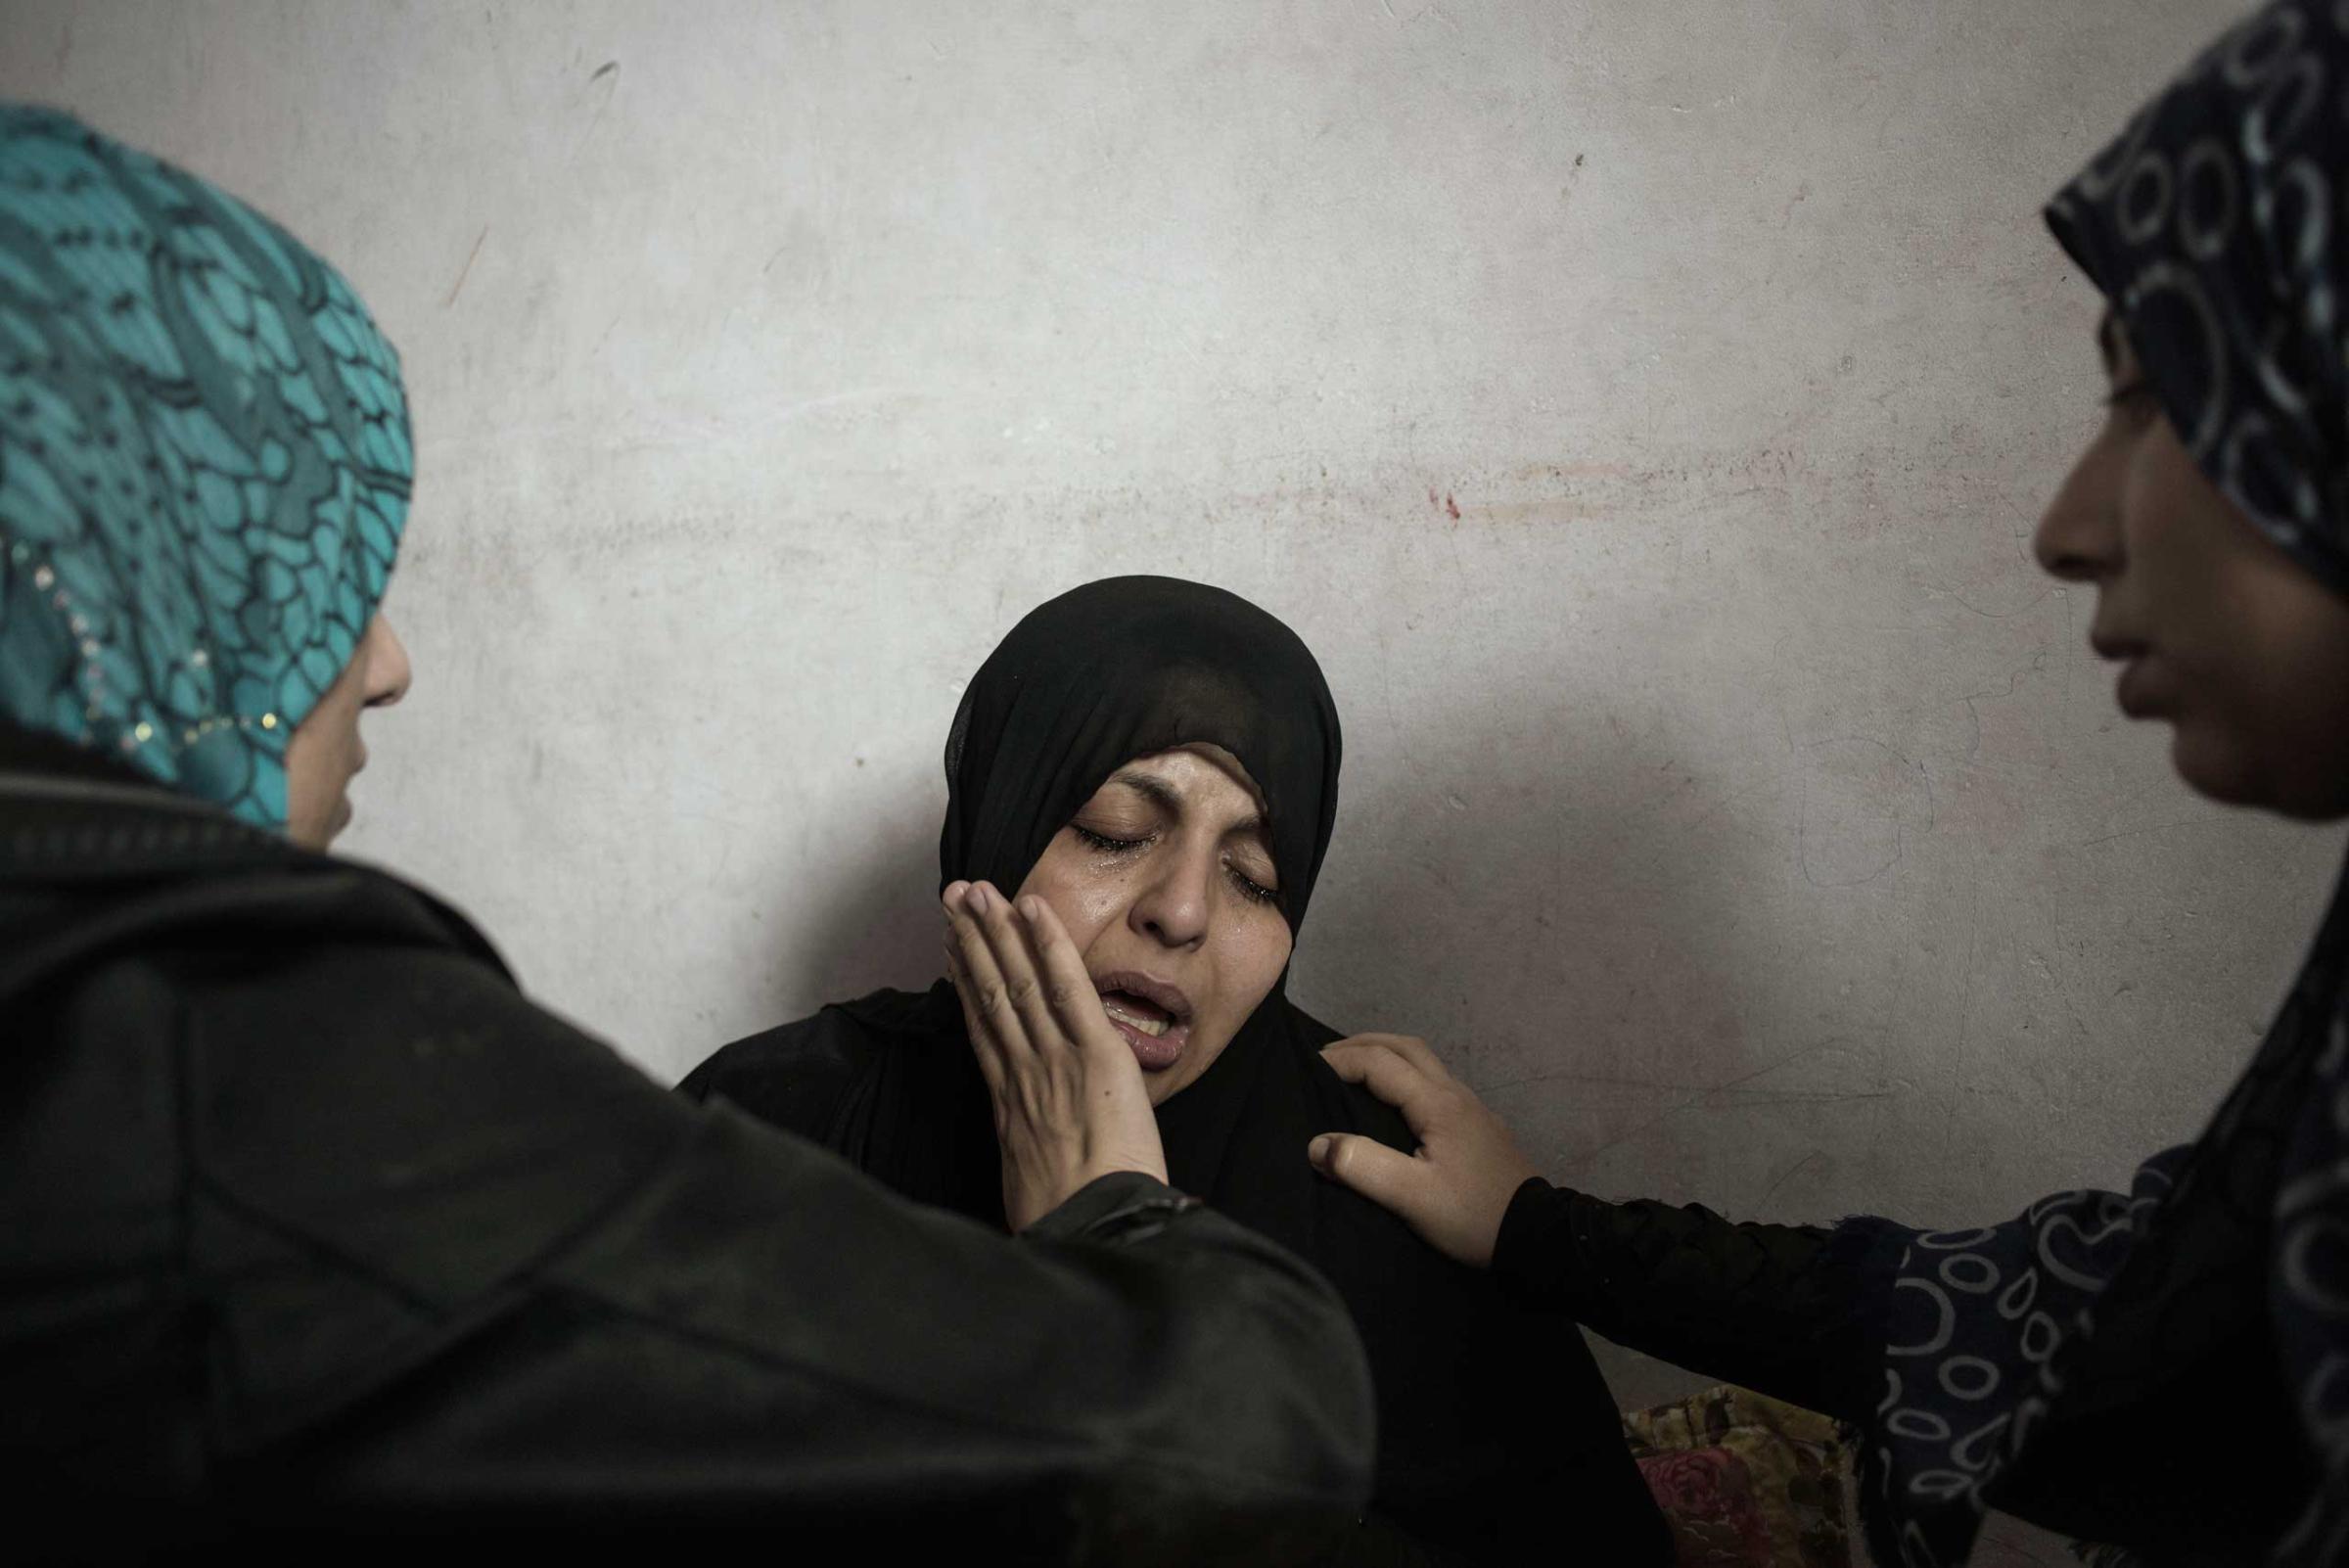 Relatives comfort Suhar Elasem as she awaits the funeral of her two sons, seven and four years old, killed by Israeli tank shells that hit their home in the northern part of Gaza City, July 19, 2014.